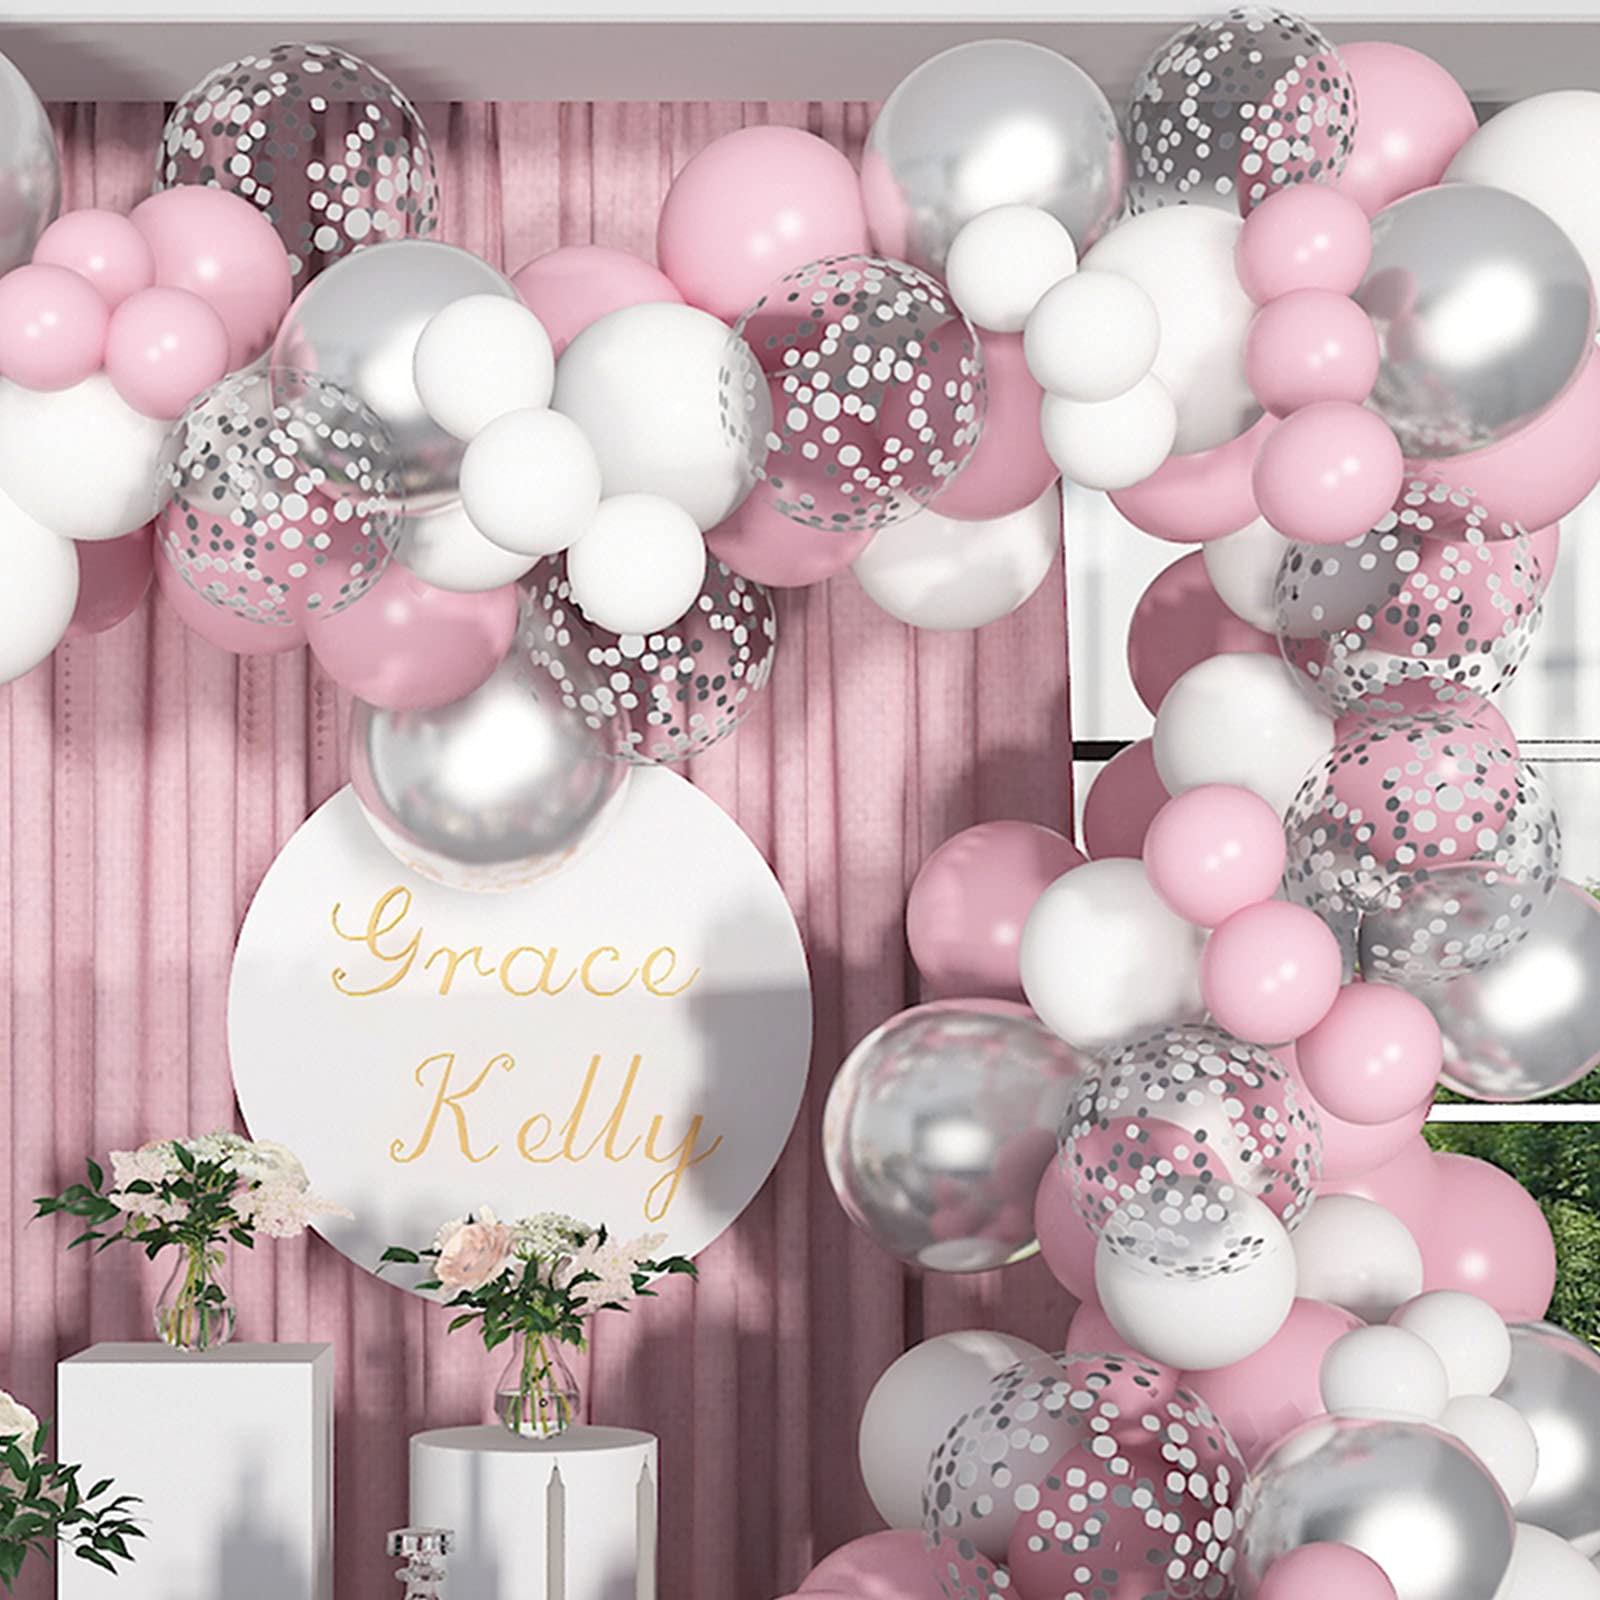 Soonlyn Pink Balloon Garland Kit 130 Pcs 12 In Pink Silver Metallic Balloons White Latex Balloons Arch Kit for Baby Shower Decorations Girl Birthday Party Bridal Shower Wedding